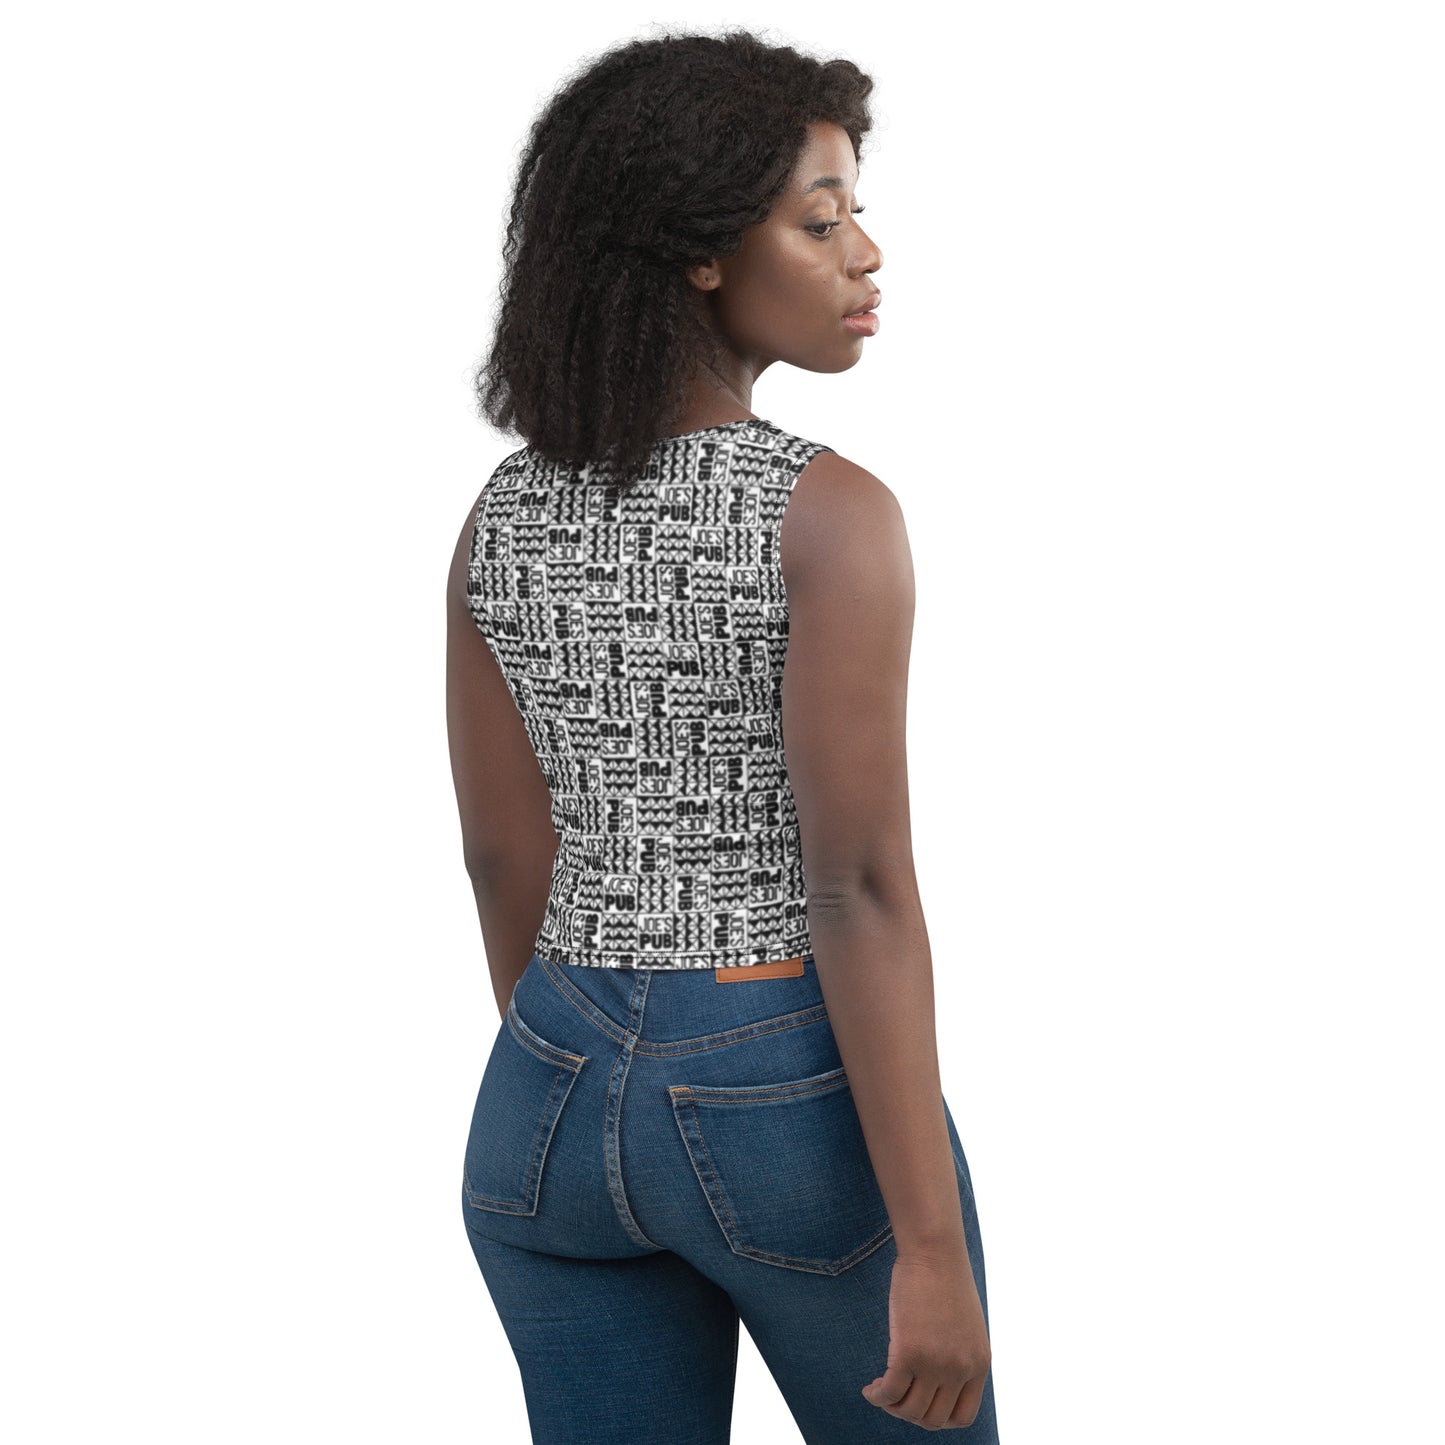 JP Checkerboard All-Over Crop Tank